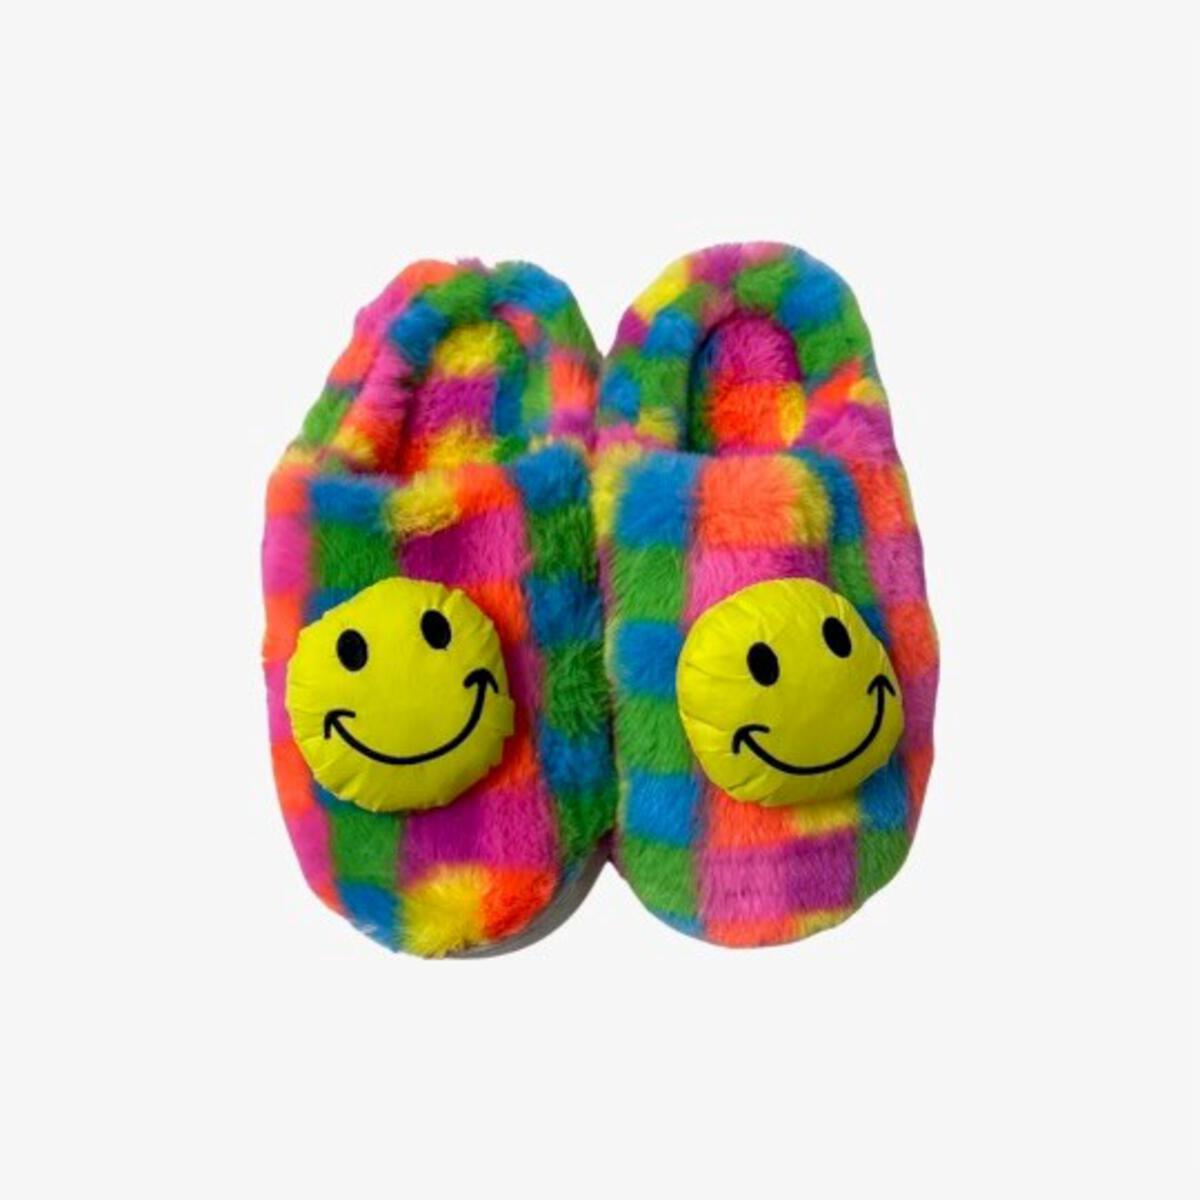 GIRLS RAINBOW CHECKERED SMILEY FACE SLIPPERS